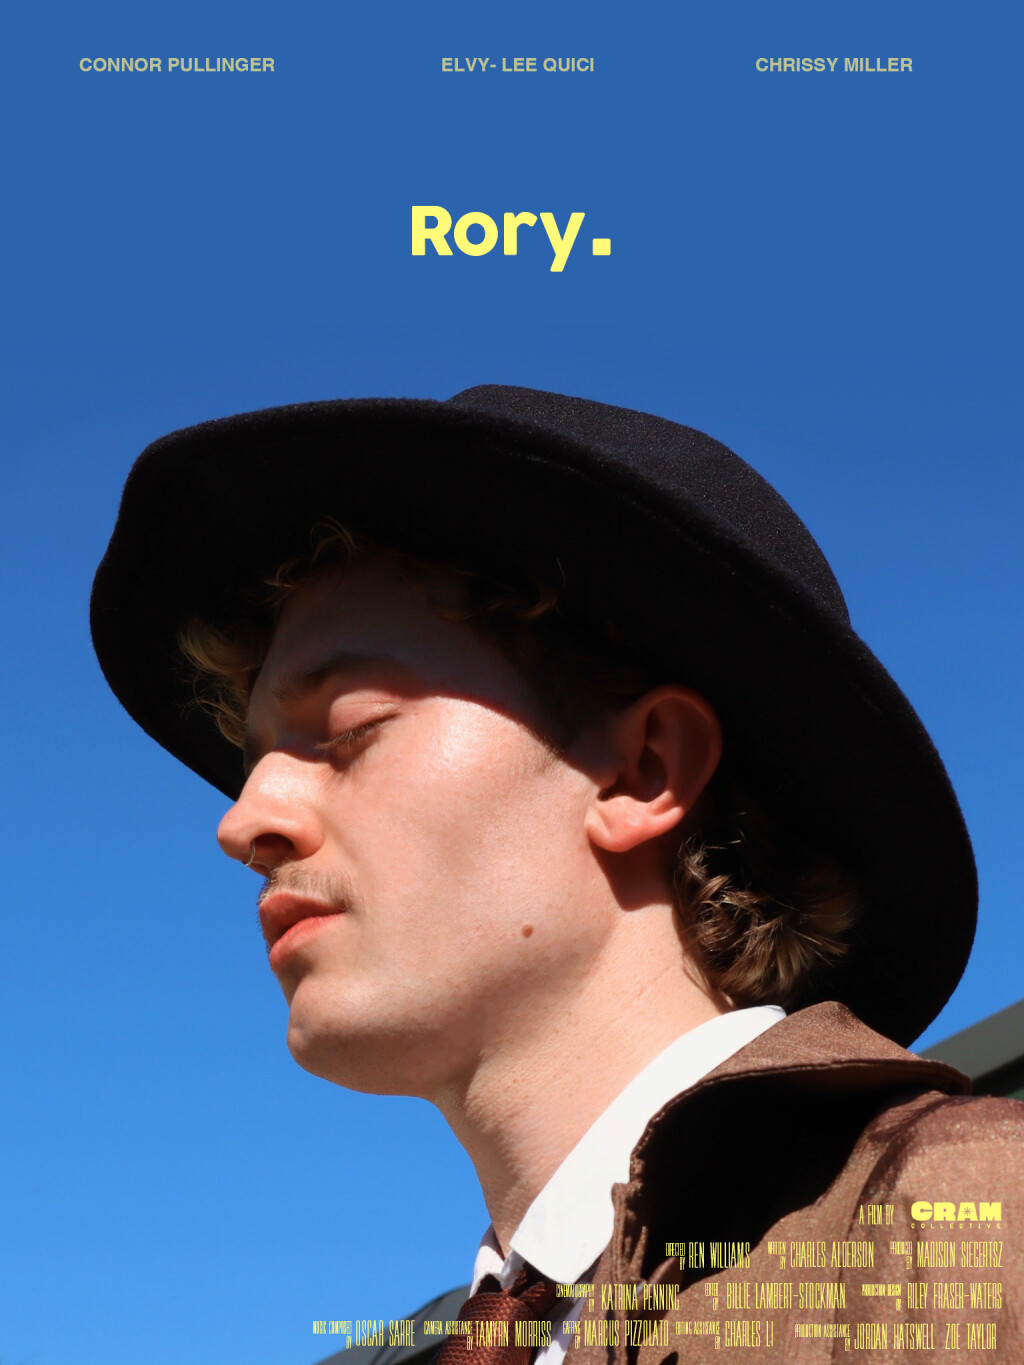 Filmposter for Rory.